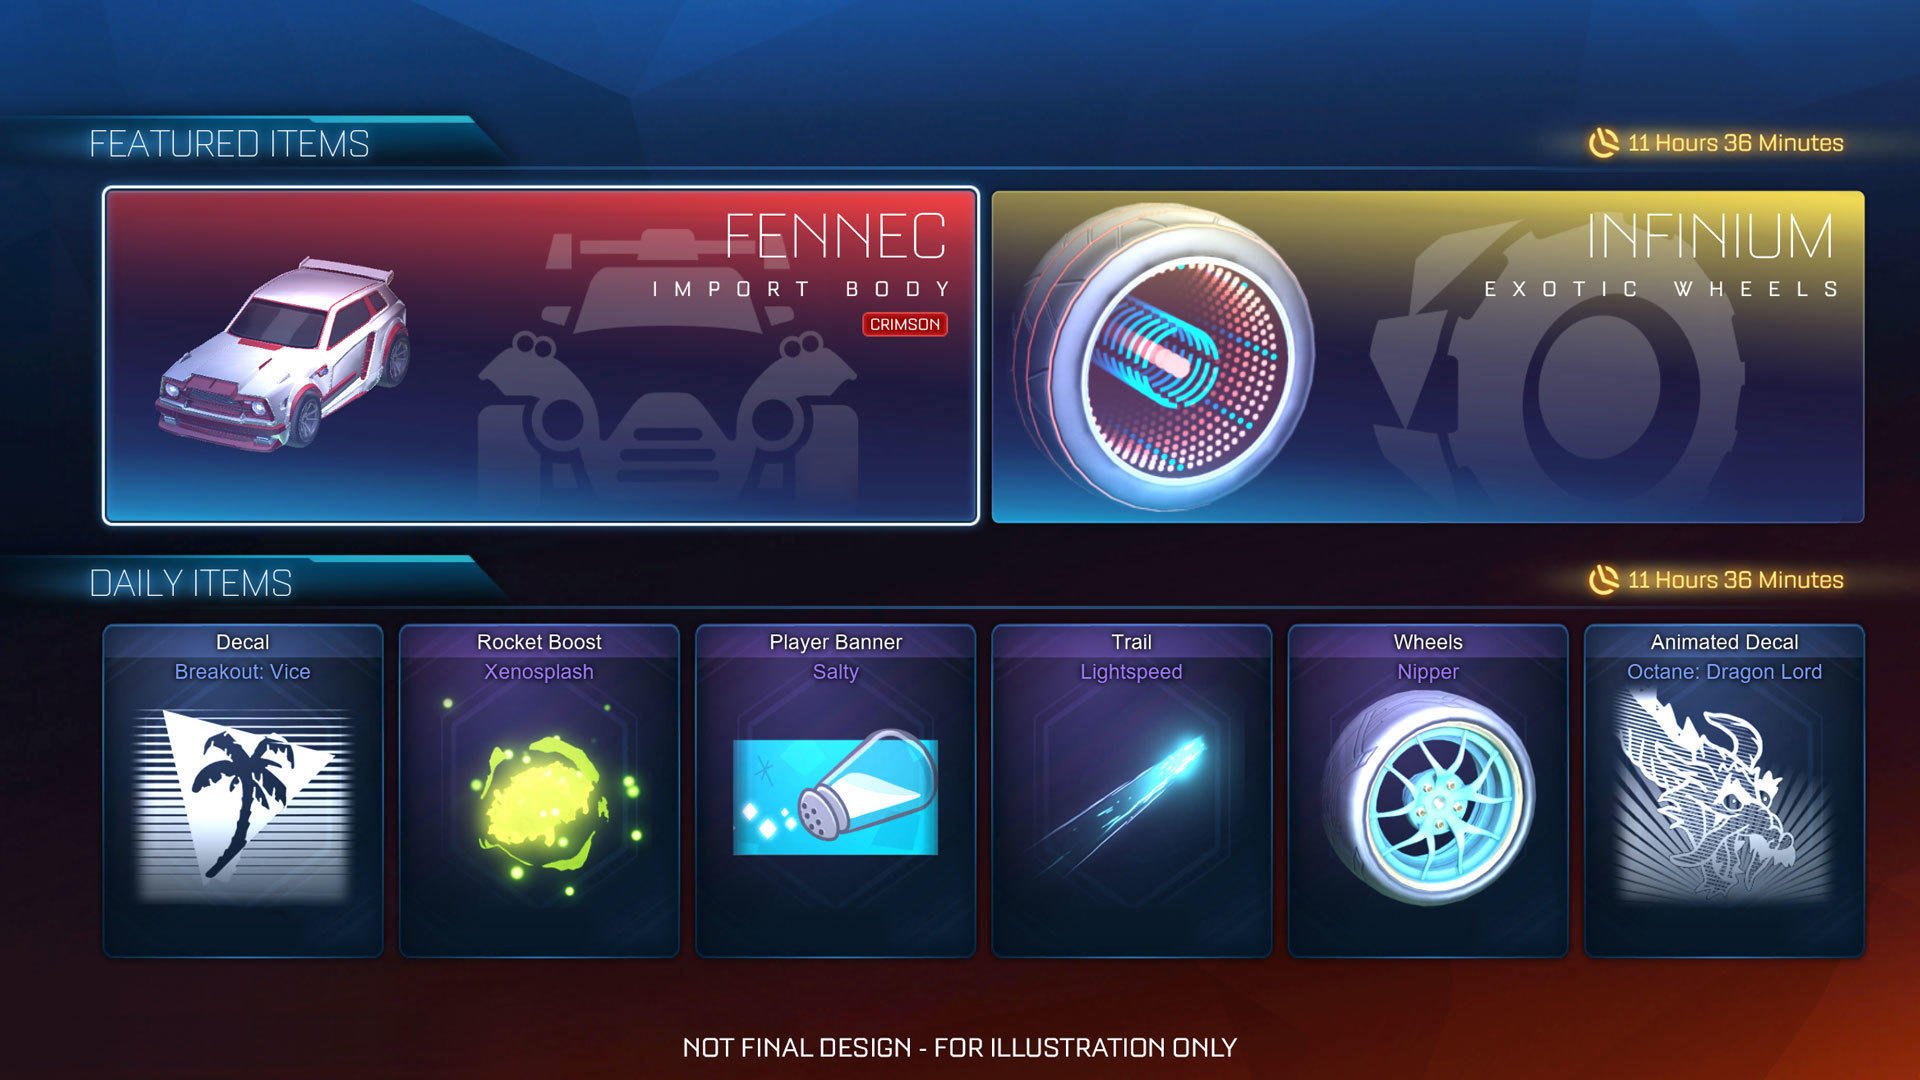 Here’s a Look at the New Rocket League Item Shop Credit Pricing